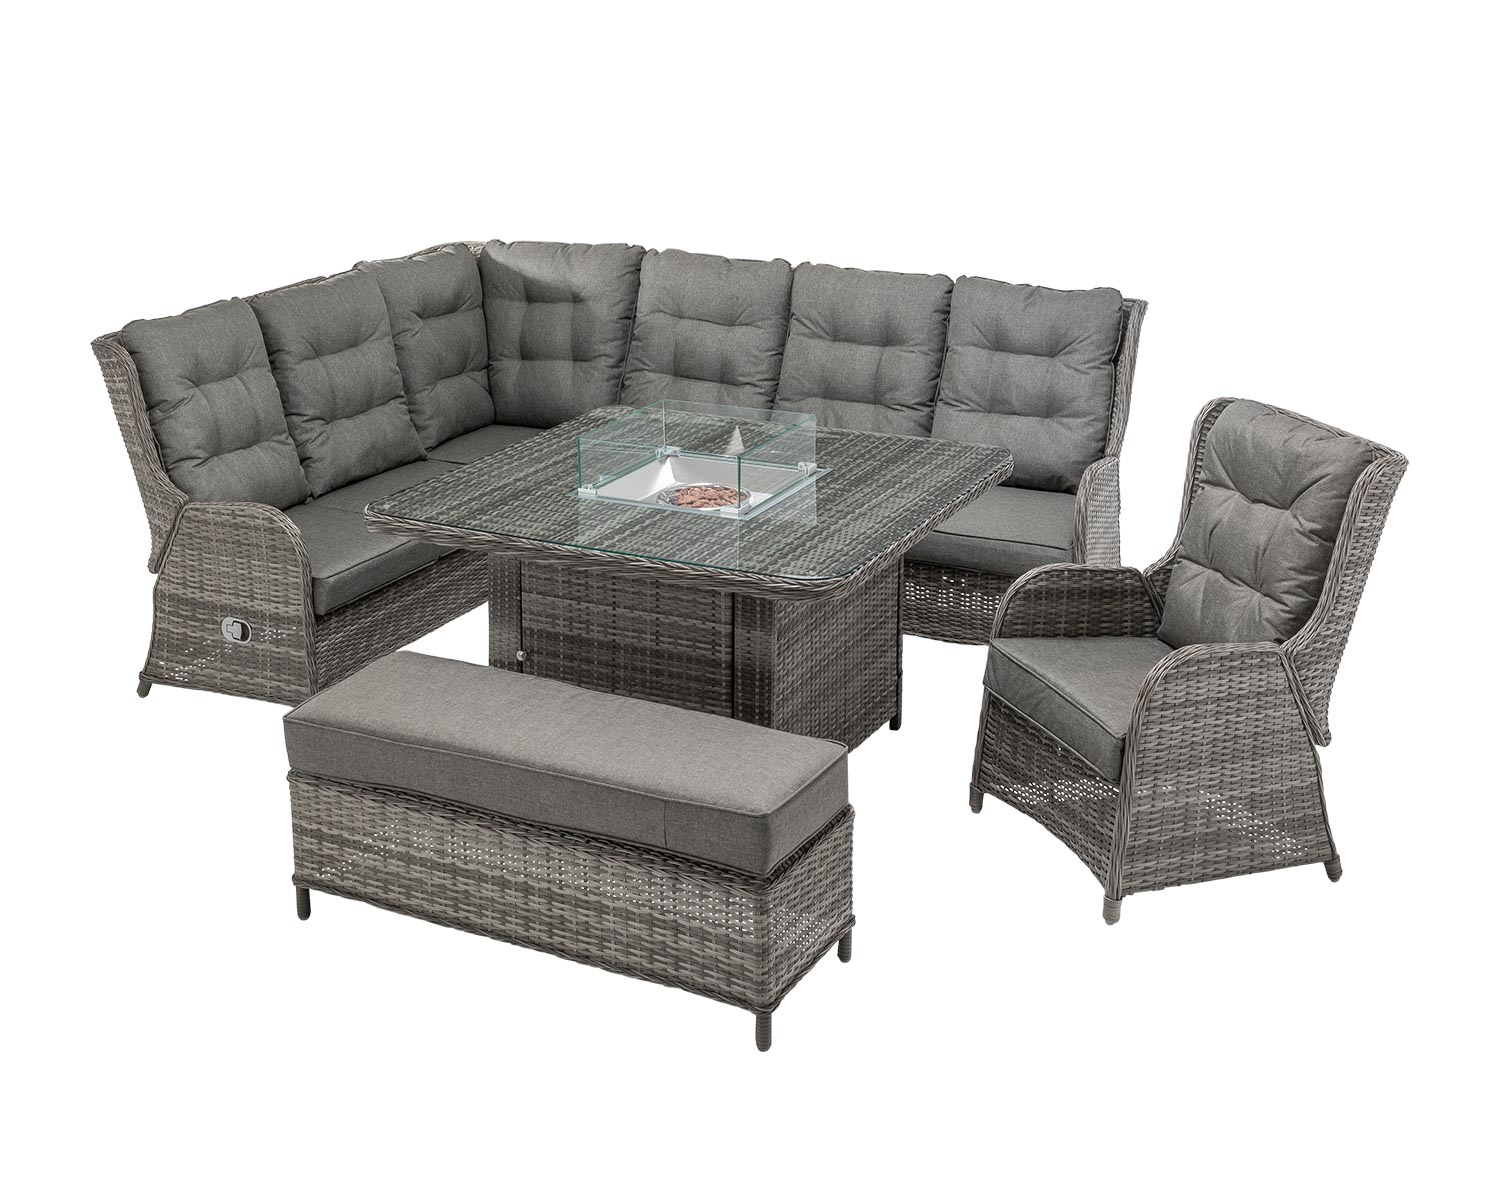 Reclining Rattan Corner Sofa Set With Square Fire Pit Table In Grey Fiji Rattan Direct